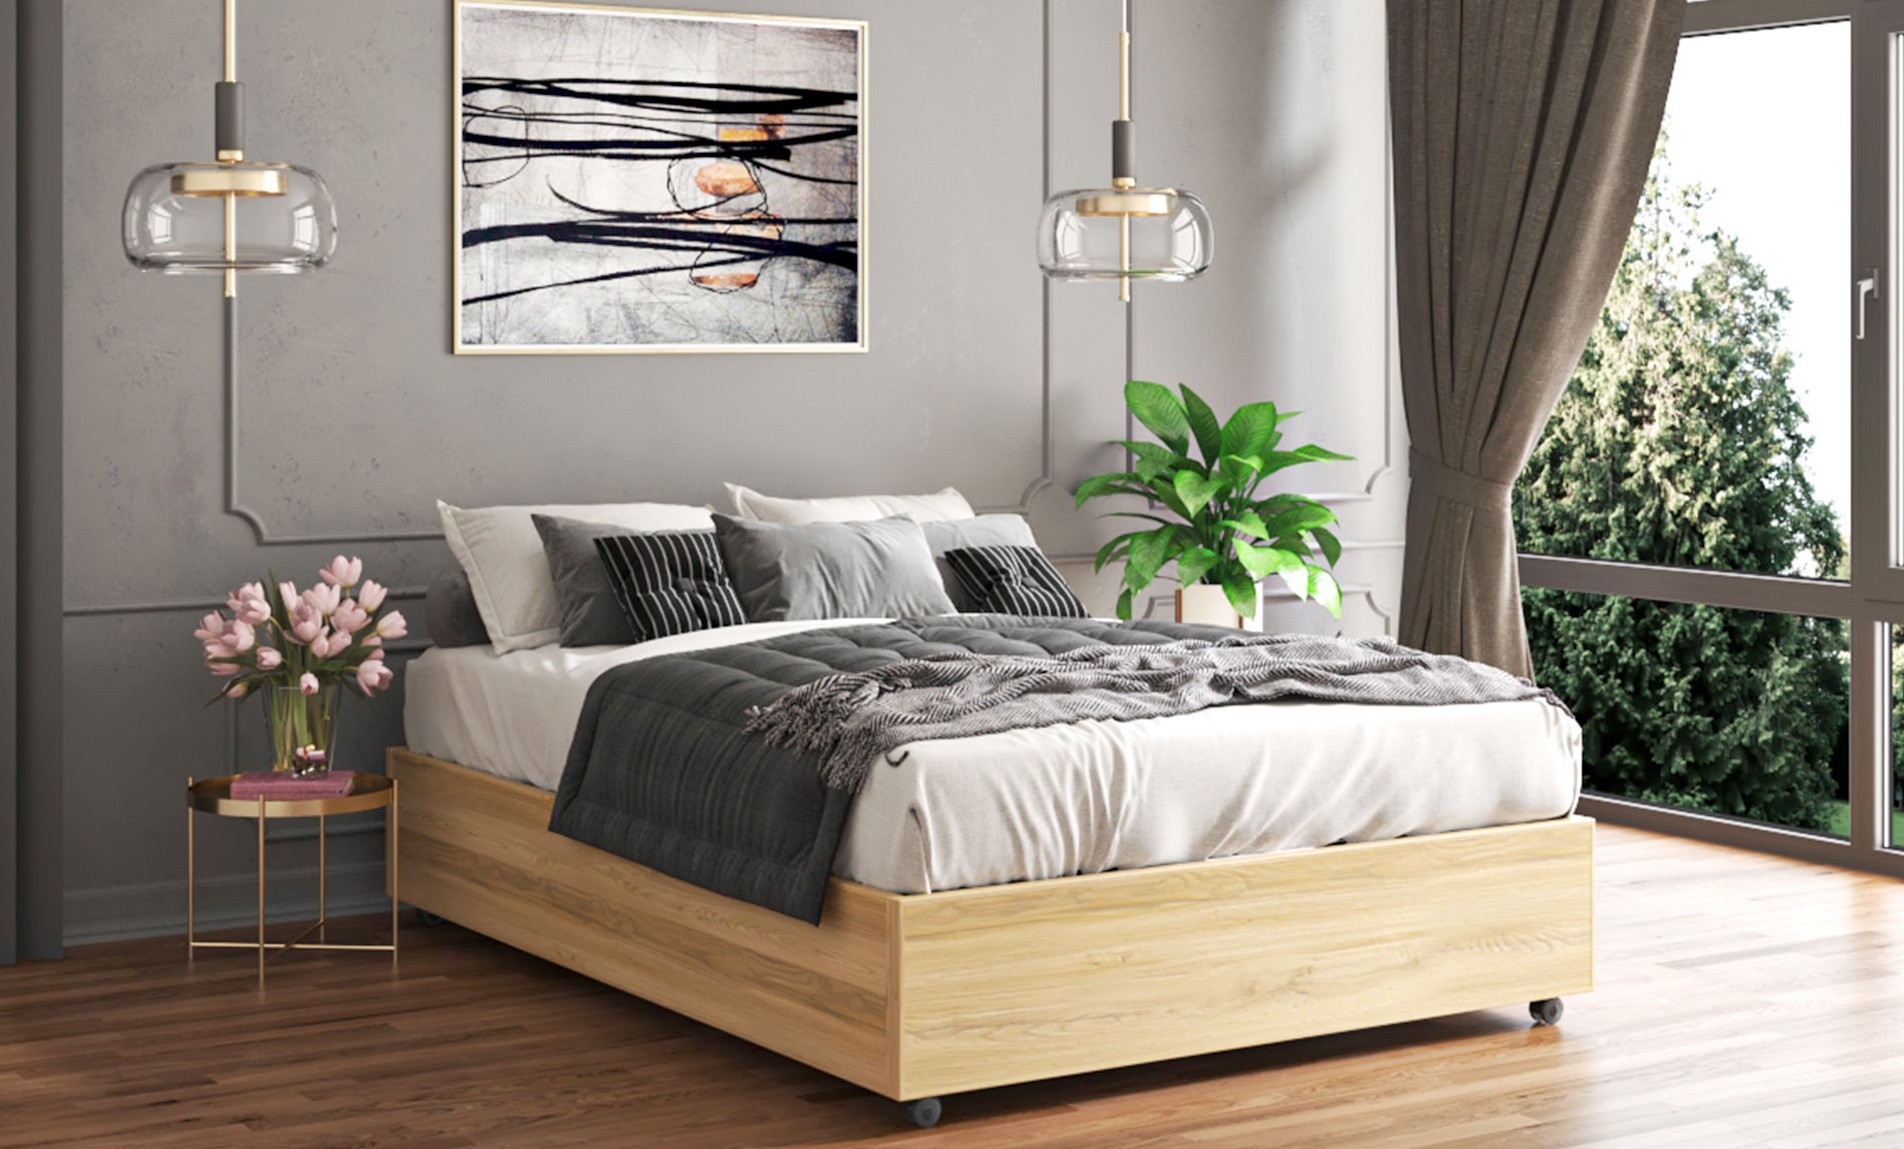 New Wooden Storage Beds crafted in exceptional wood finishes